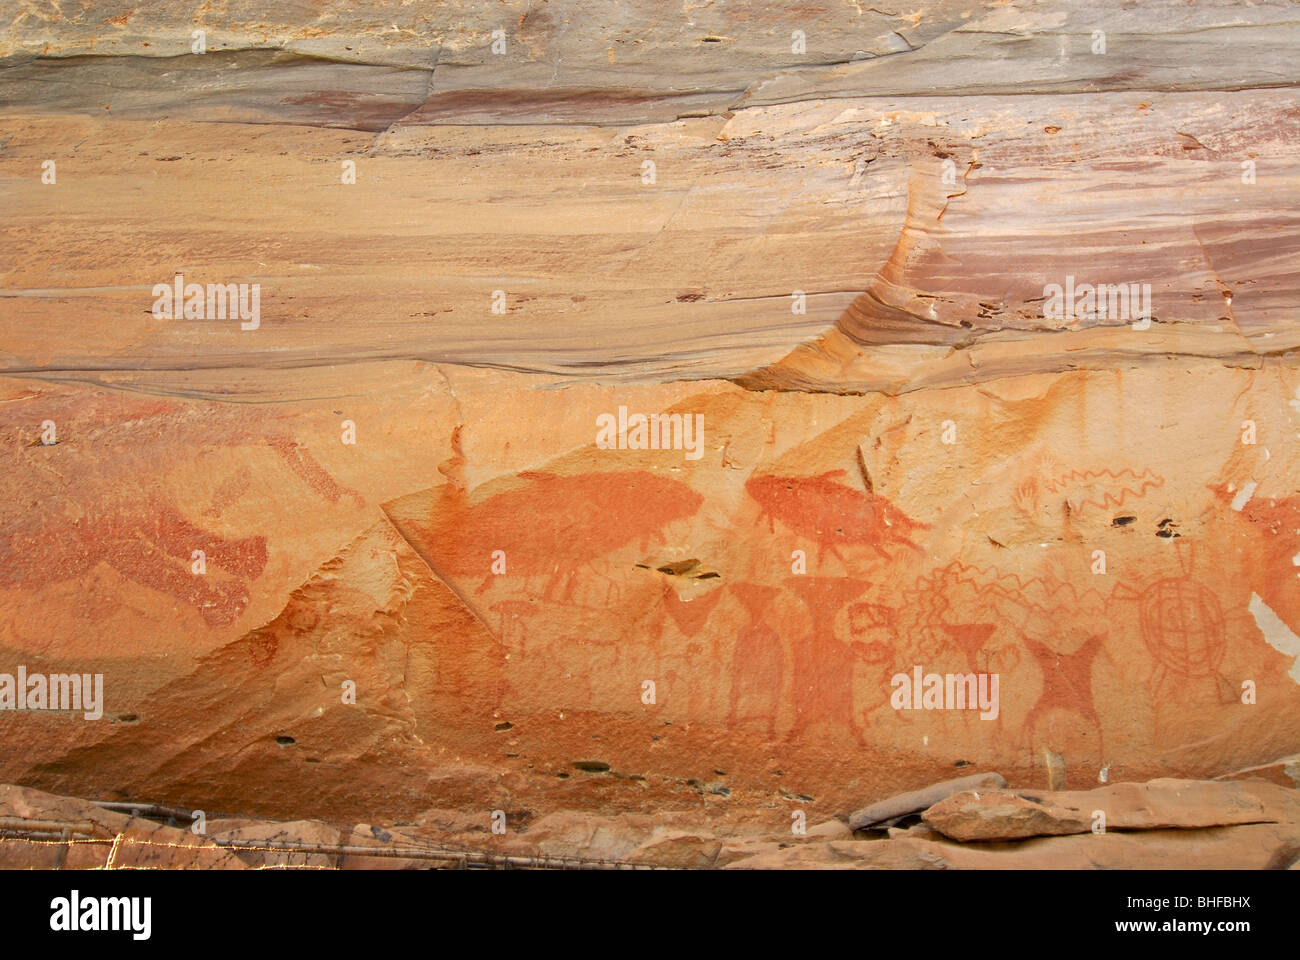 Prehistorical rock paintings at the rock cliff Pha Taem am Mekong, Province Ubon Ratchathani, Thailand, Asia Stock Photo